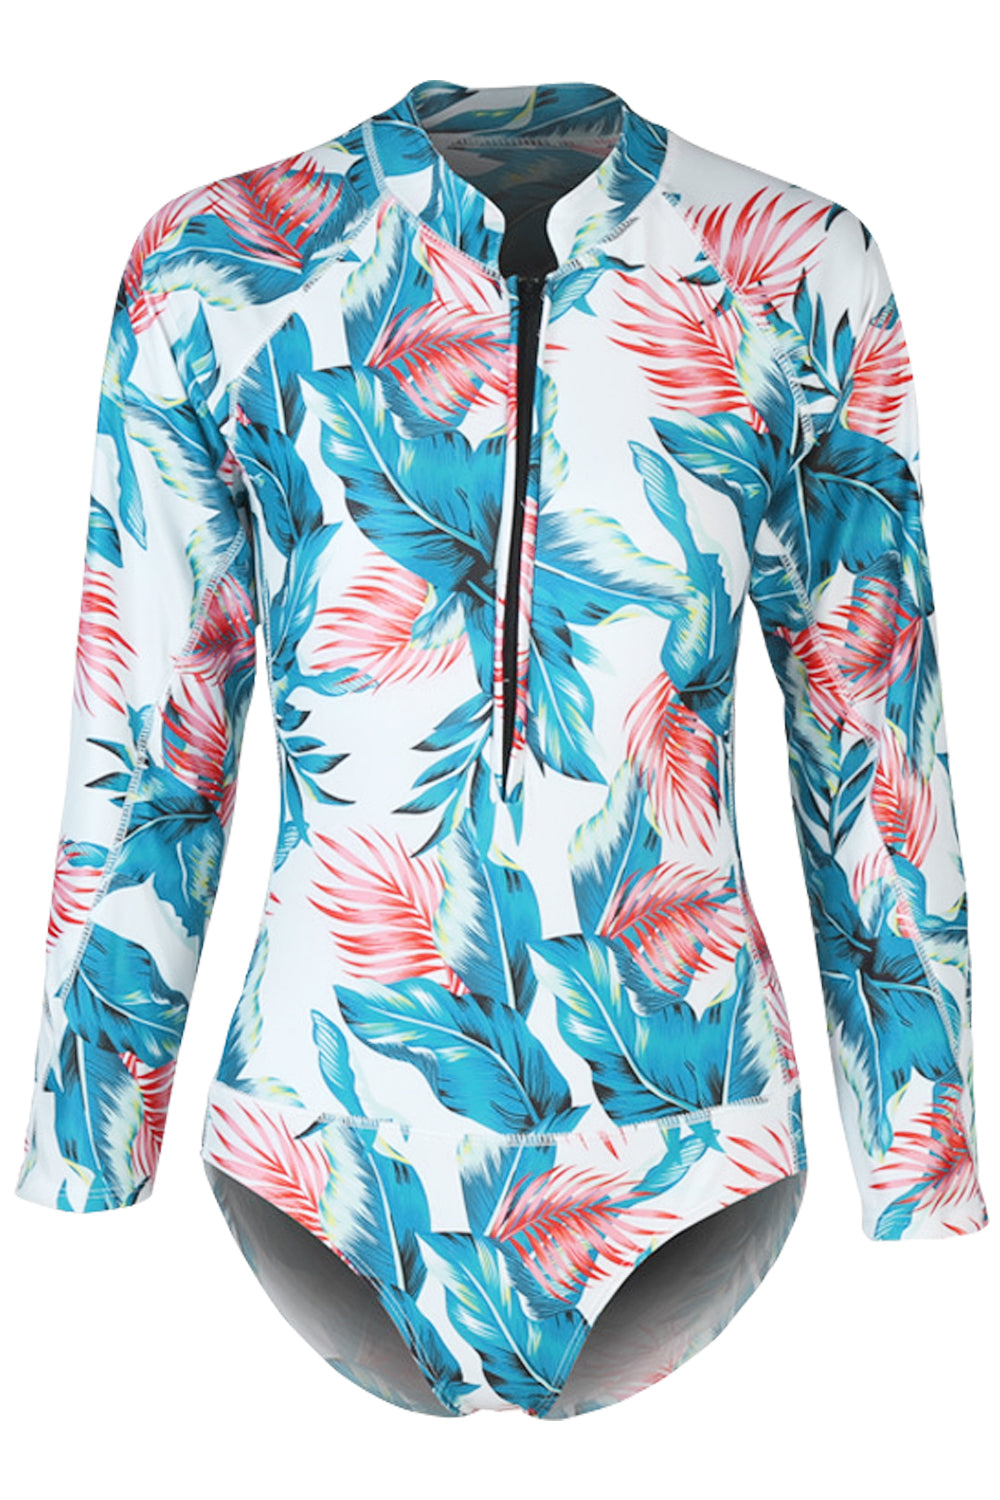 Iyasson Tropical Floral Printing Long-sleeves One-piece Swimsuit